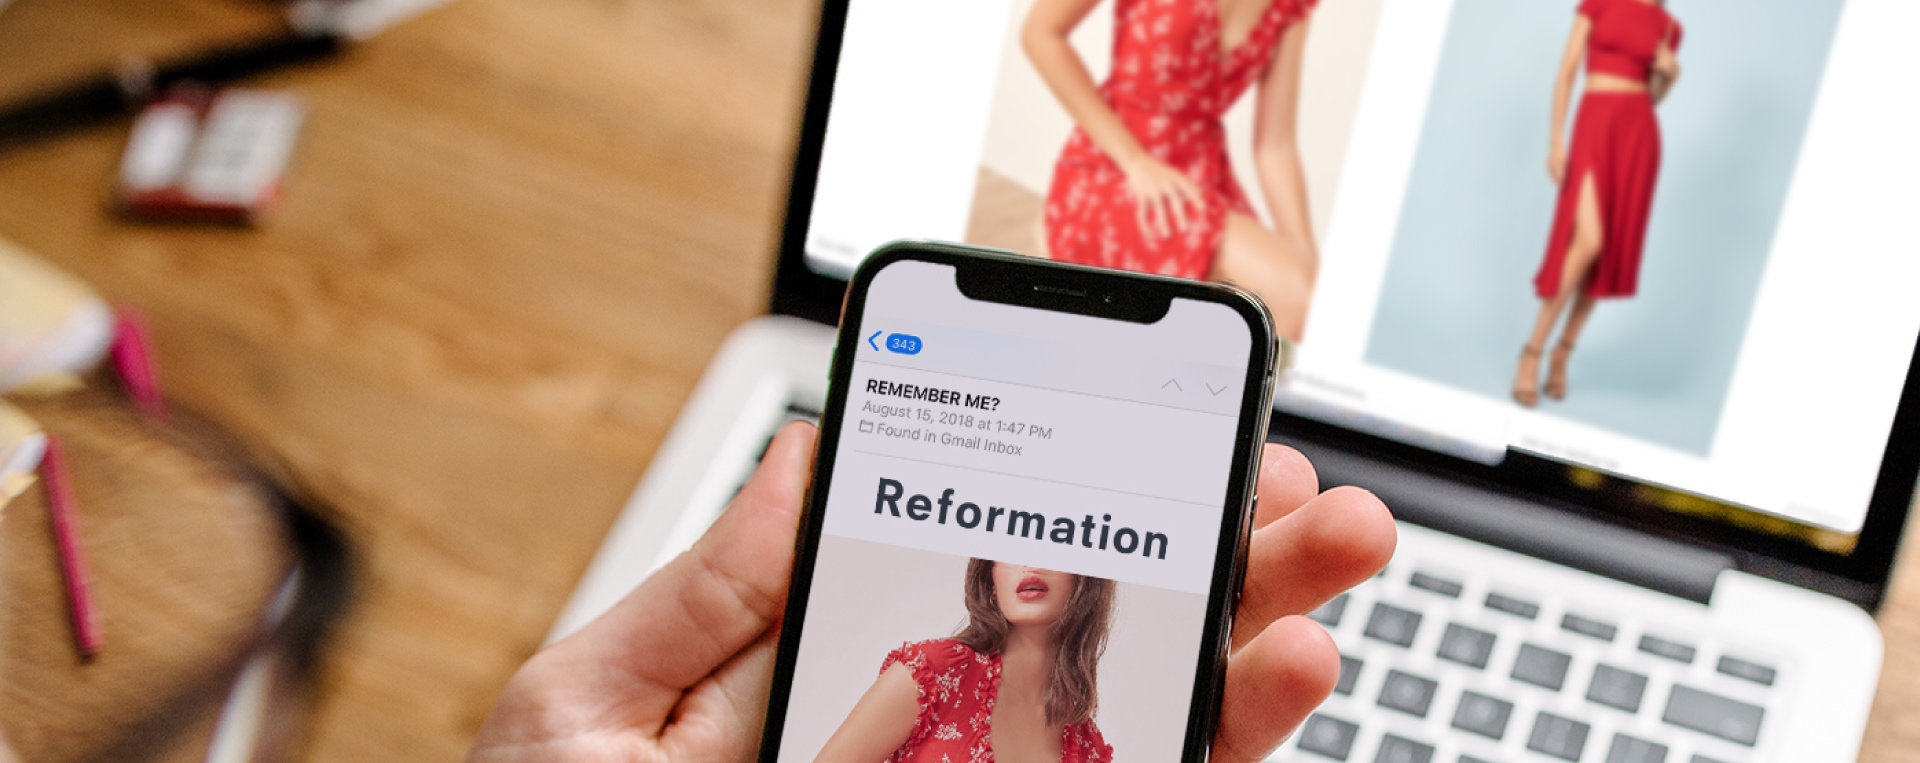 Reformation Desktop and Mobile Touchpoints 